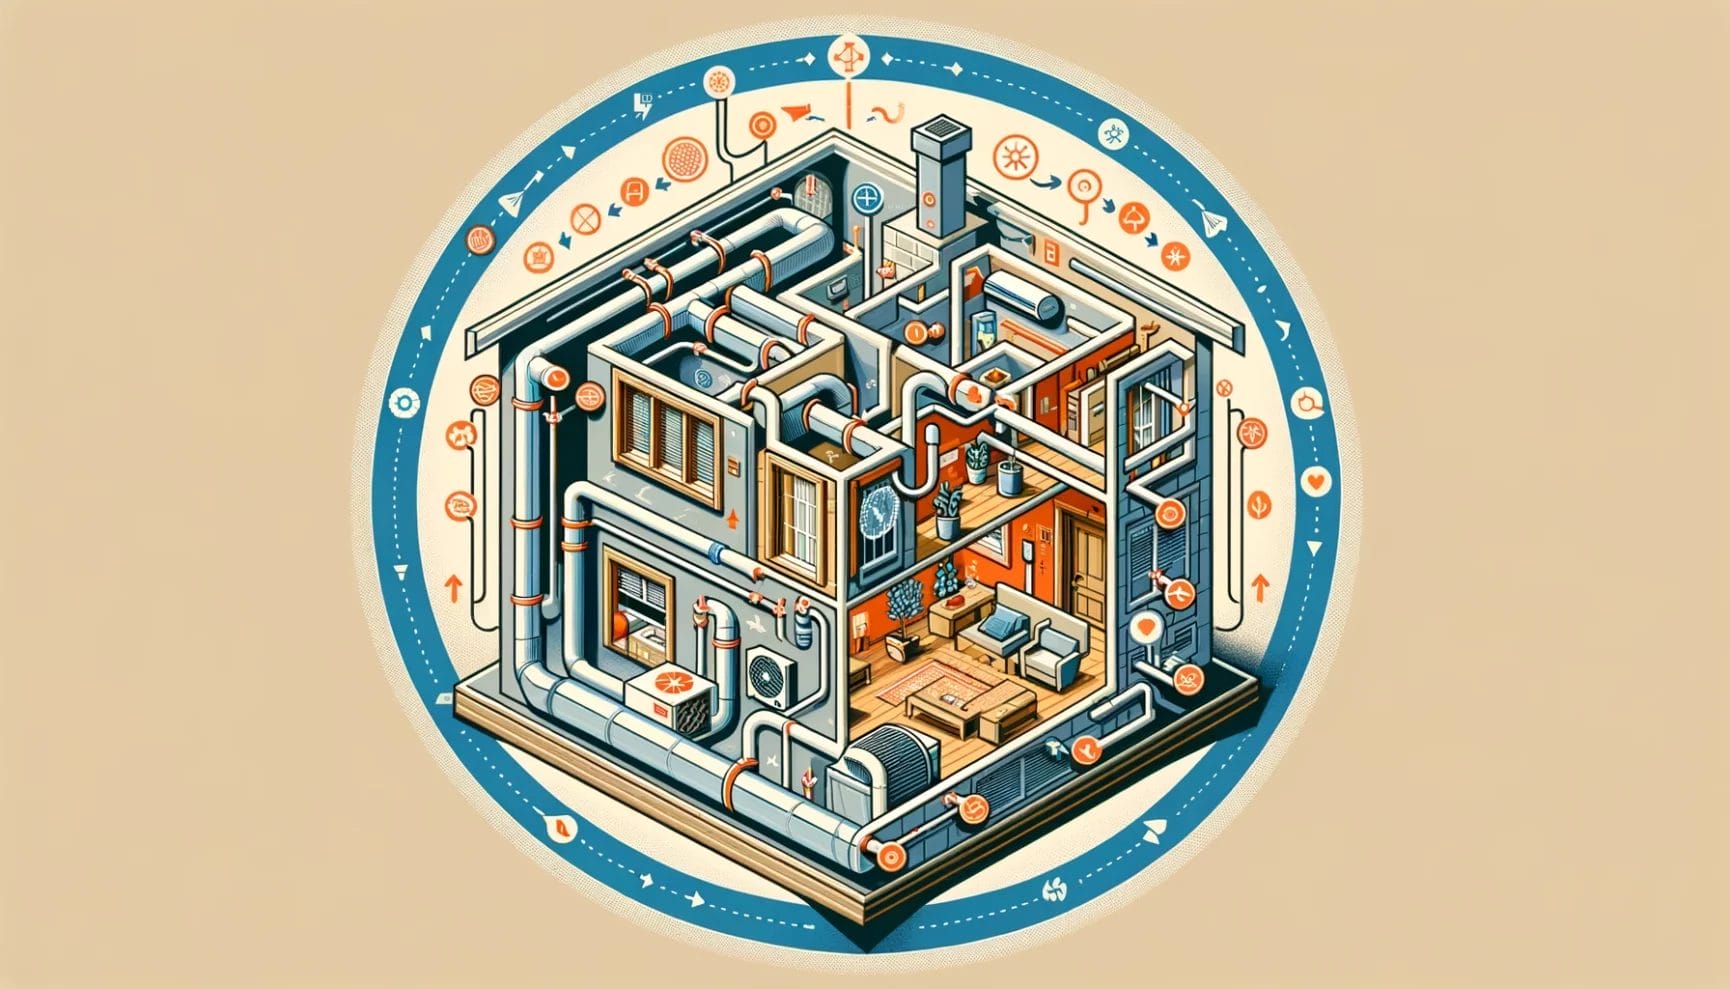 Isometric illustration of a stylized, cutaway view of a multi-level home, showcasing various rooms and plumbing systems within a circular border.